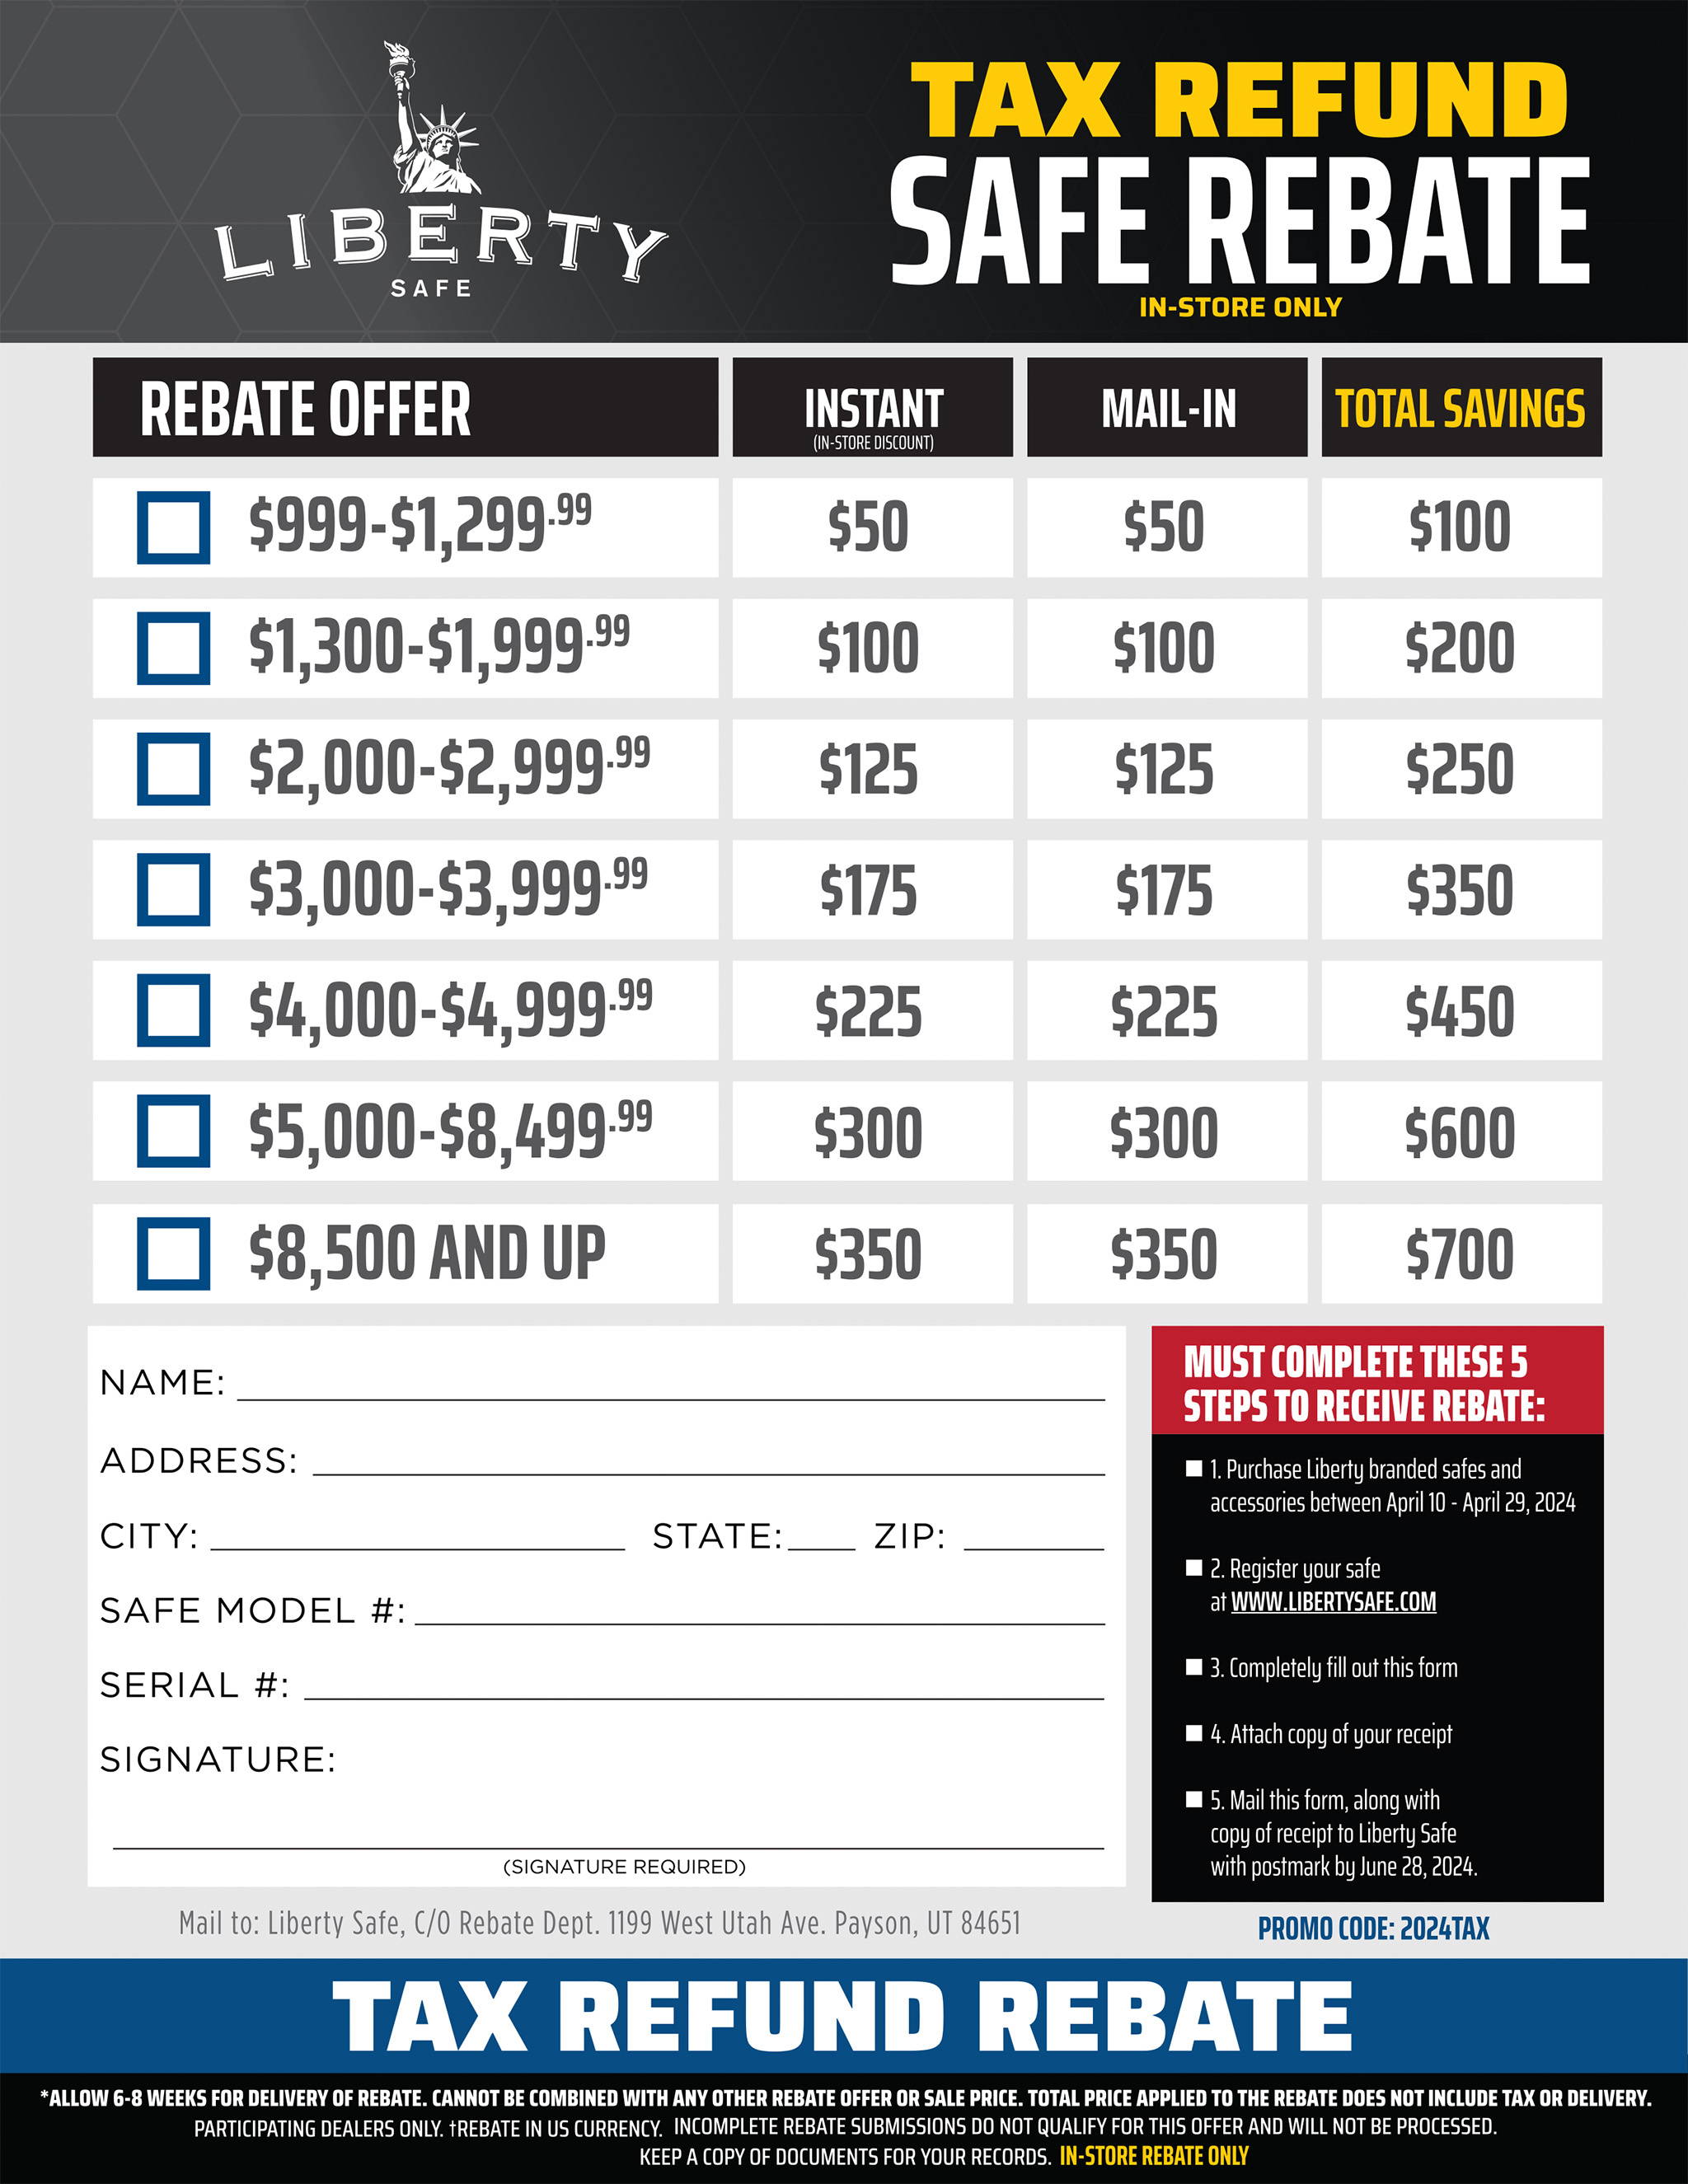 Liberty Safe Tax Refund Safe Rebate Mail-In Form for In-Store Purchases 